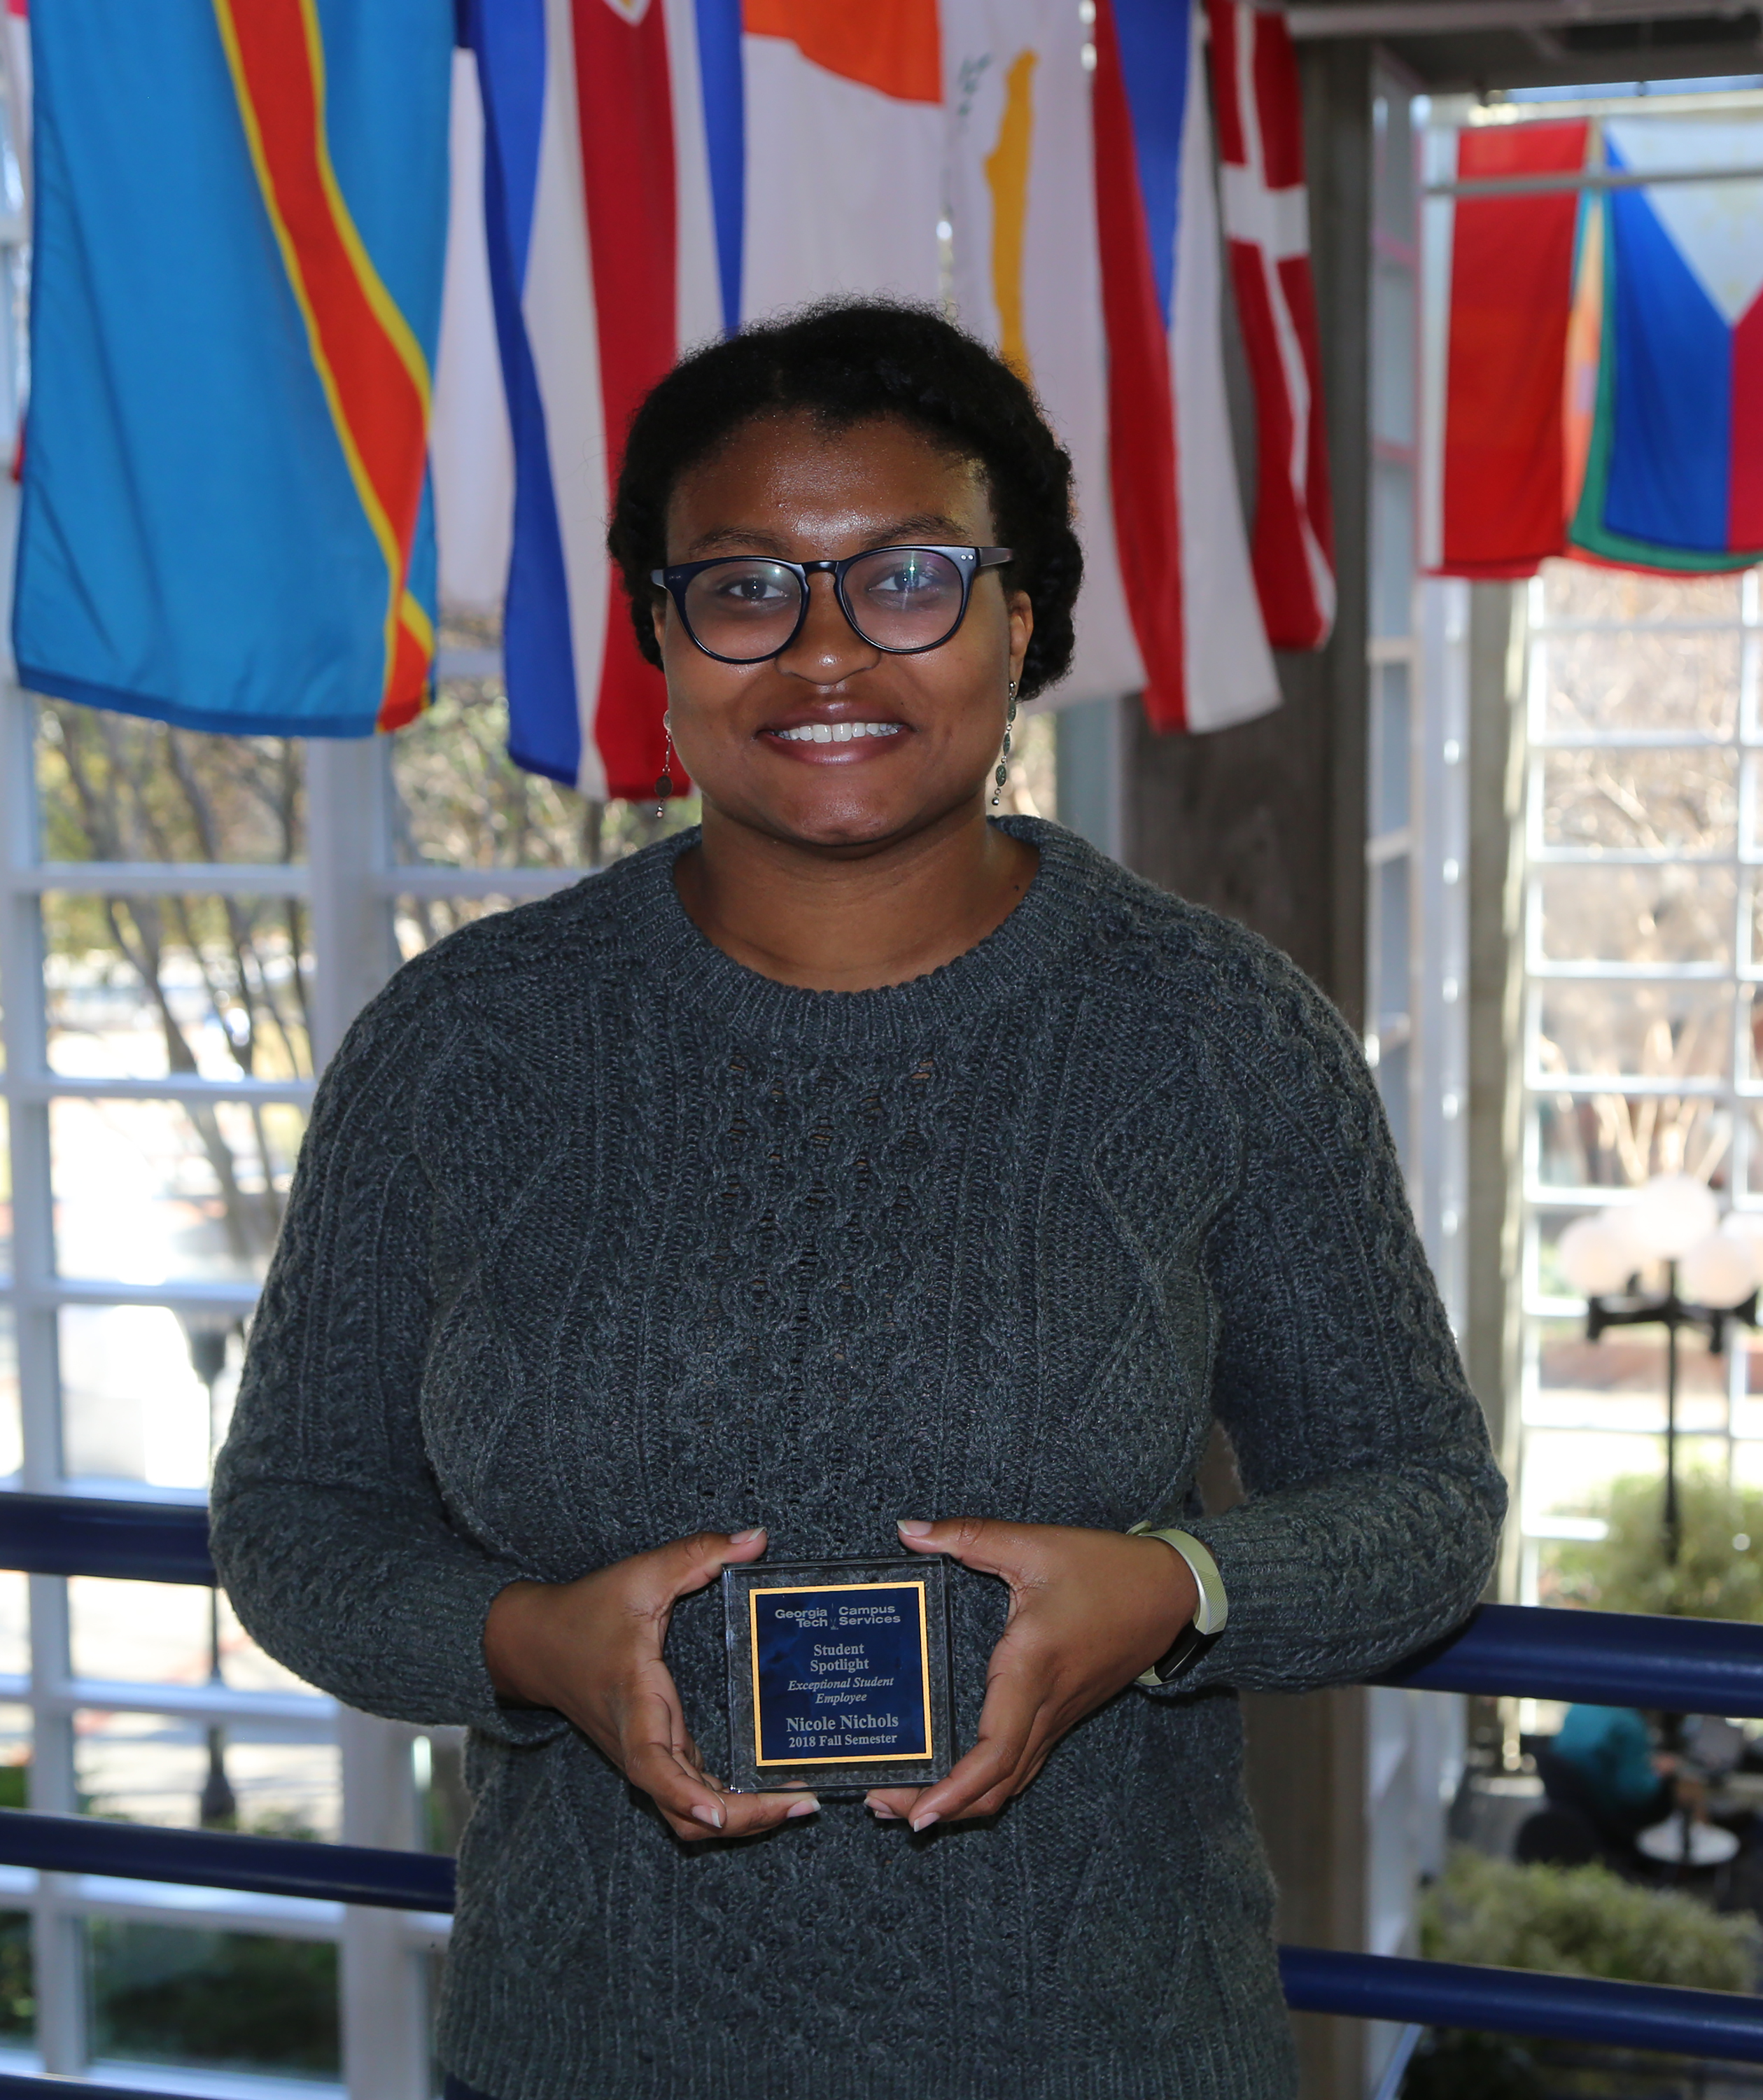 Nicole Nichols received a Campus Services Student Spotlight award for Fall Semester 2018.